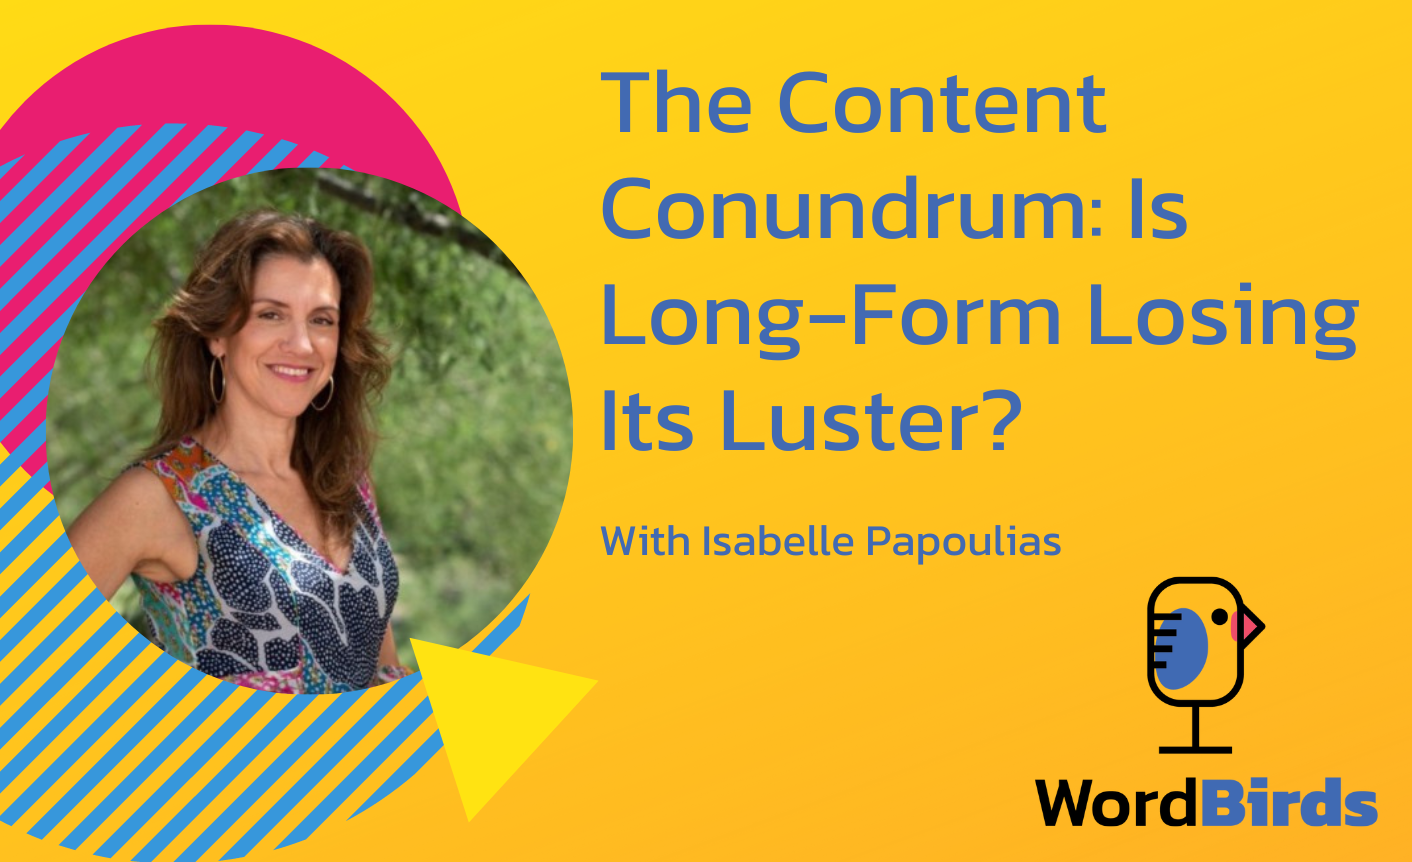 On a yellow background with a headshot of Isabelle Papoulias on the left, the title reads "The Content Conundrum: Is Long-Form Losing Its Luster?"